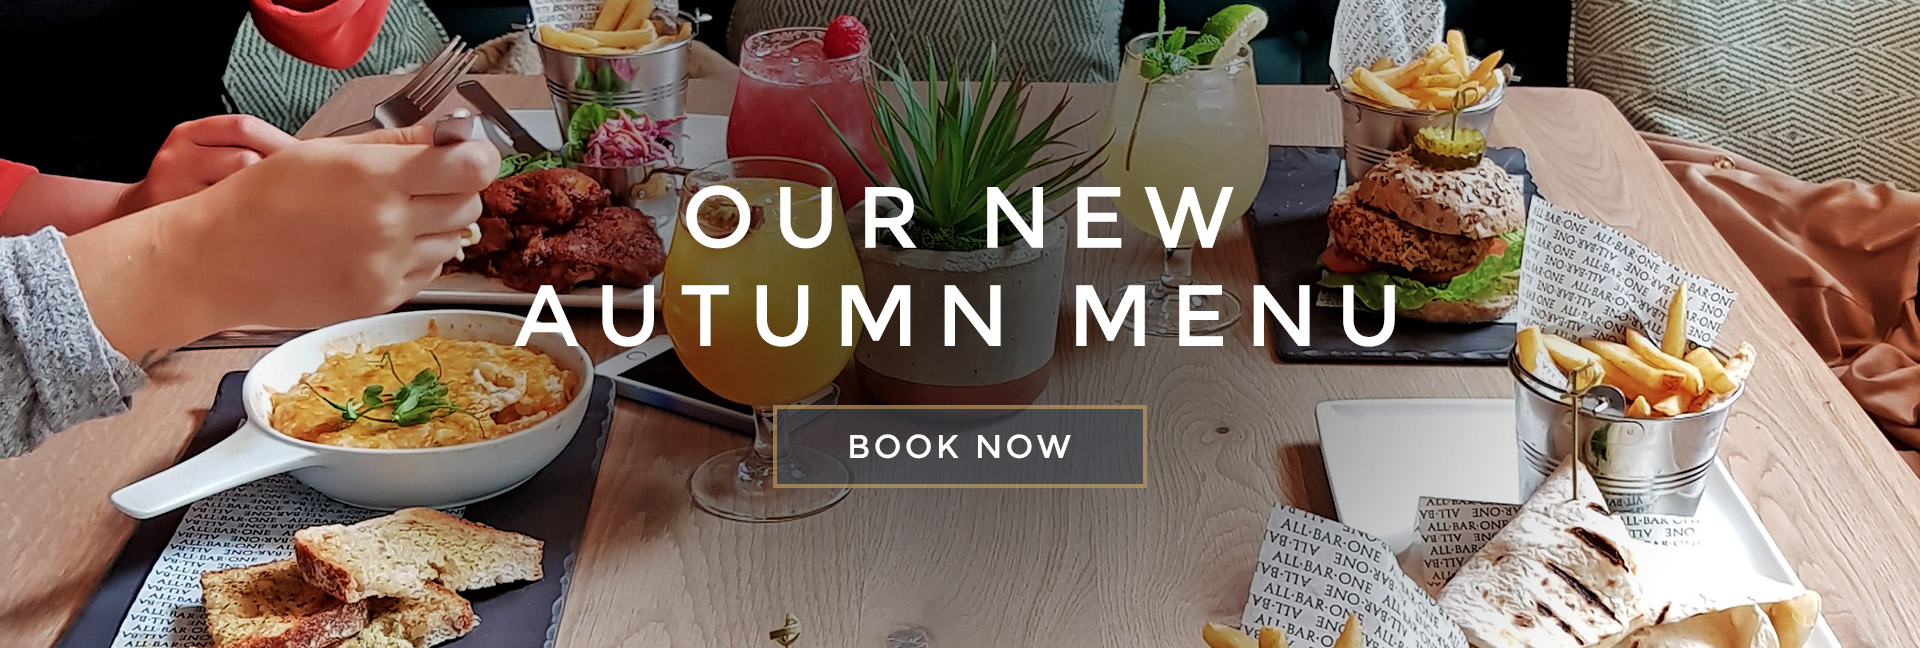 Our new Autumn menu at All Bar One Aberdeen - Book now